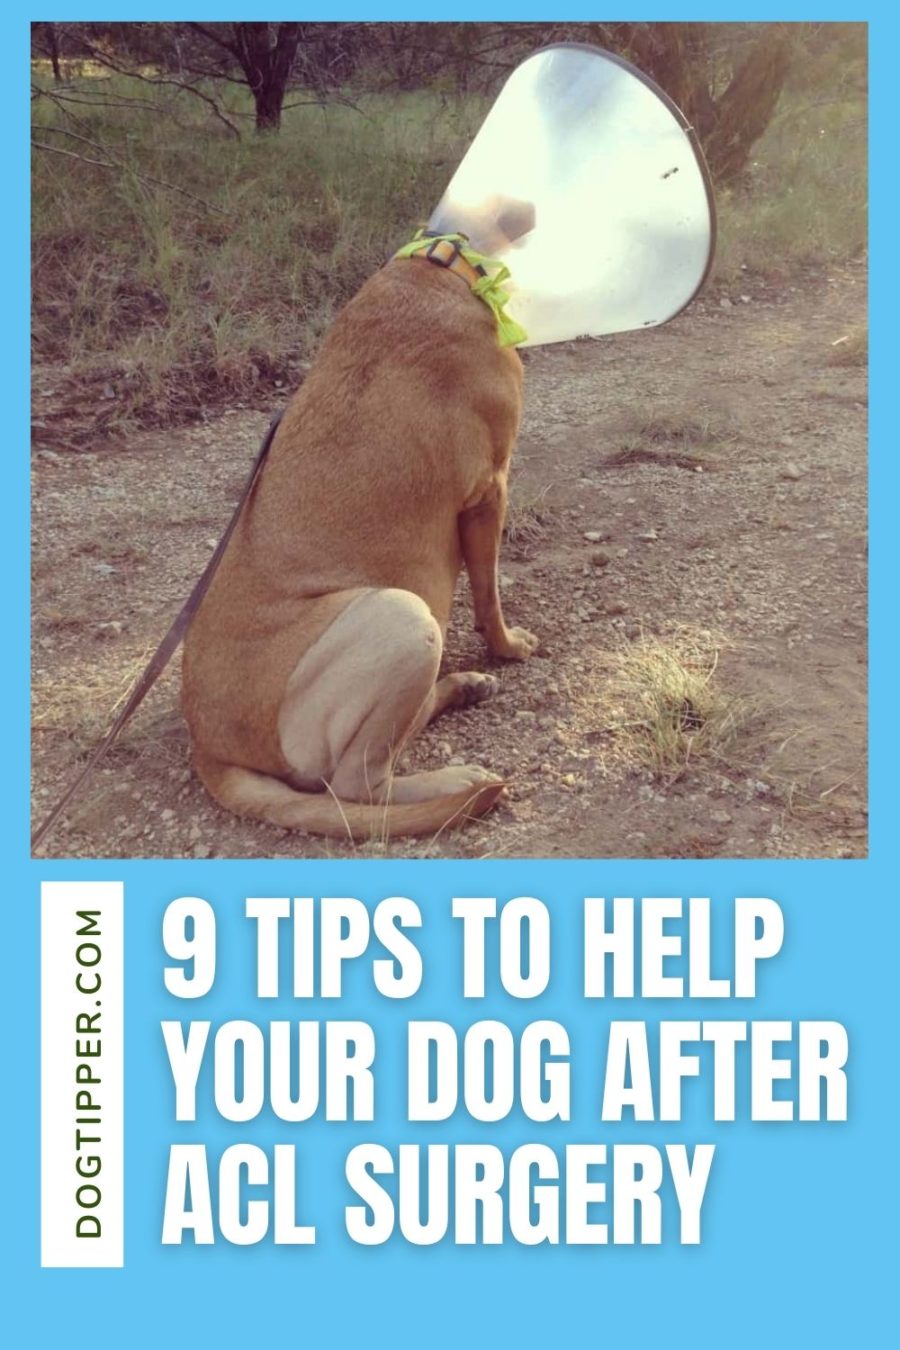 9 tips to help your dog after ACL surgery